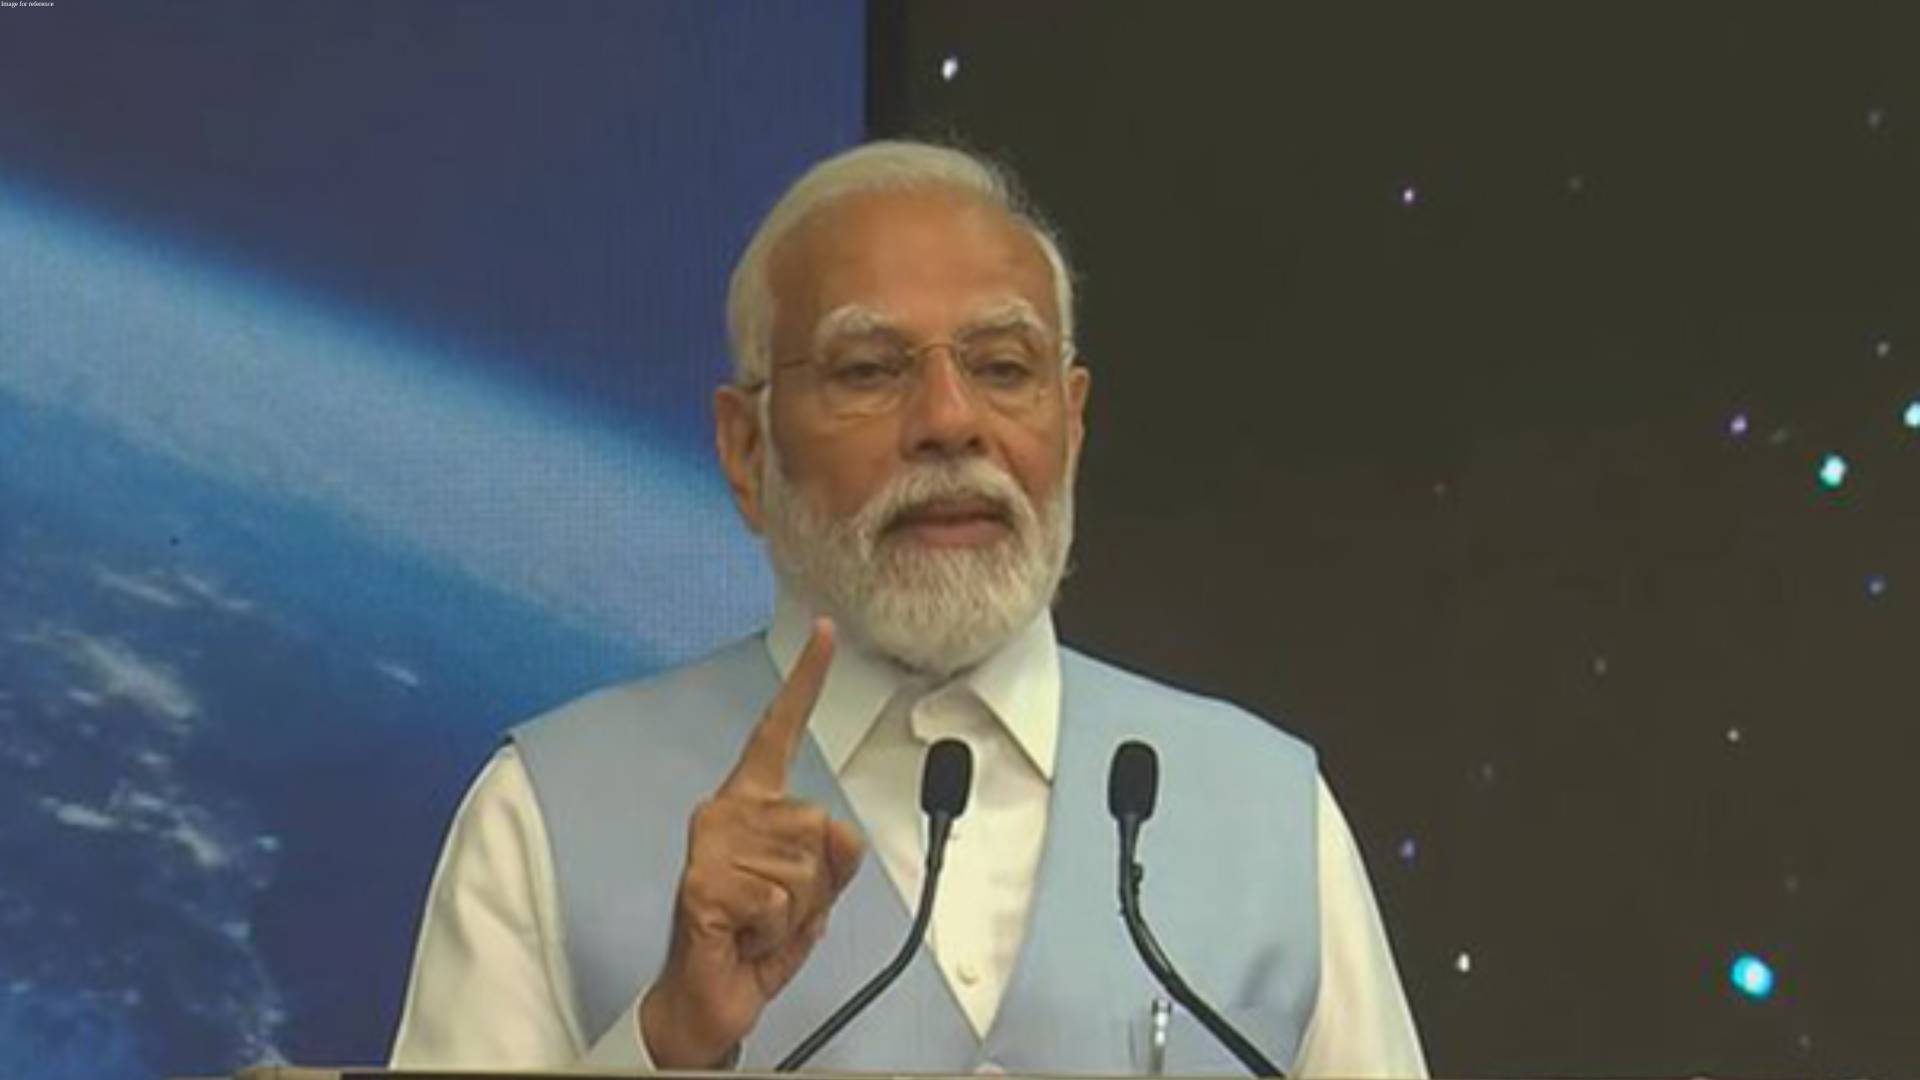 India will have its own station in space by 2035: PM Modi in Kerala